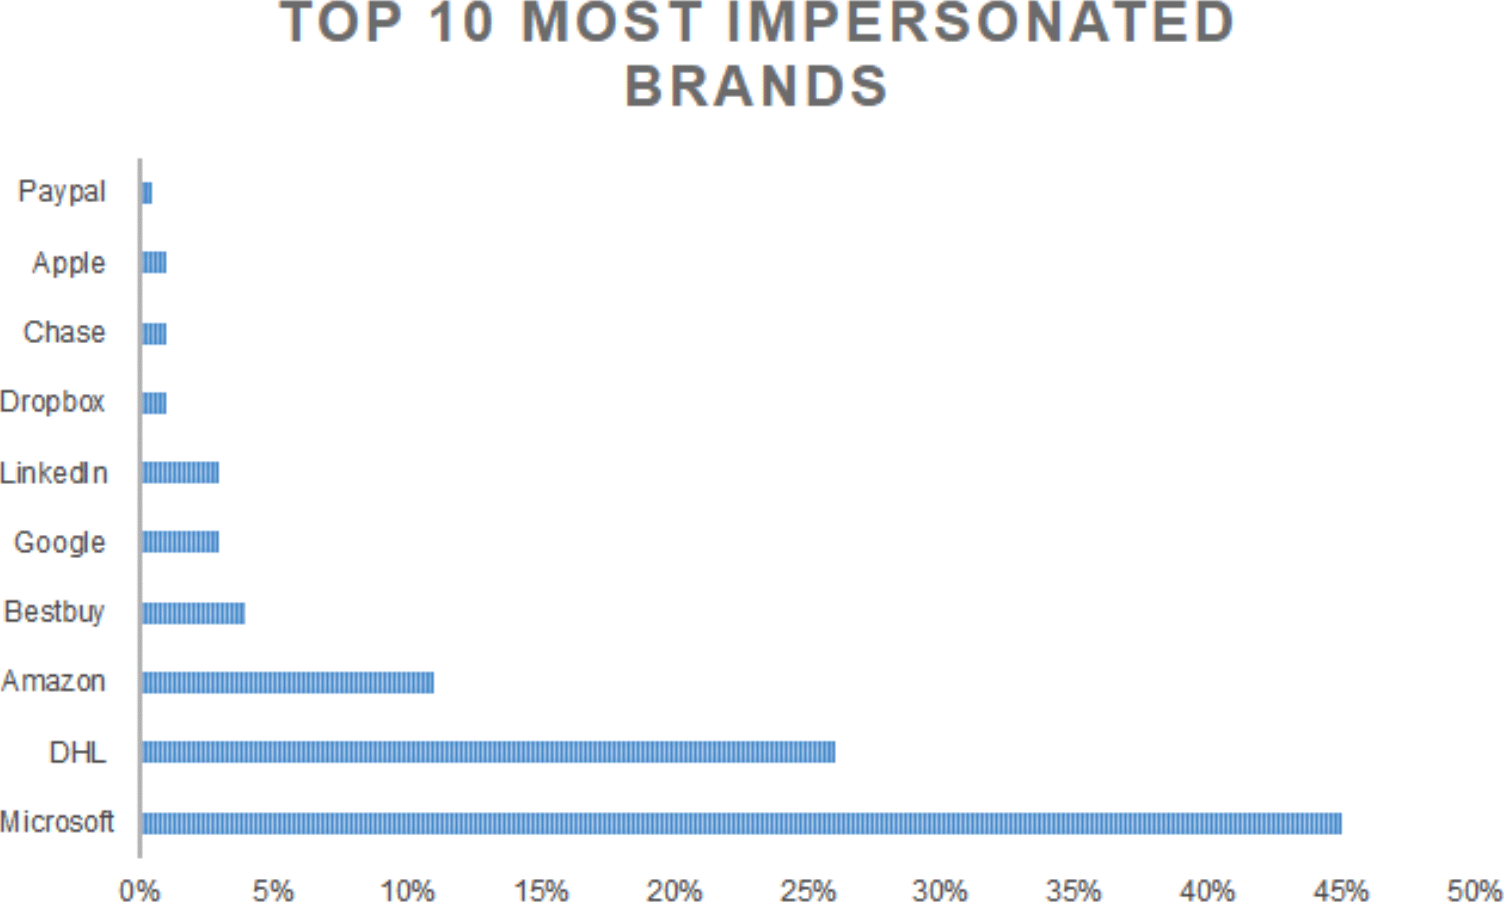 Q2 2021 Top 10 Most Impersonated Brands in Domains 13